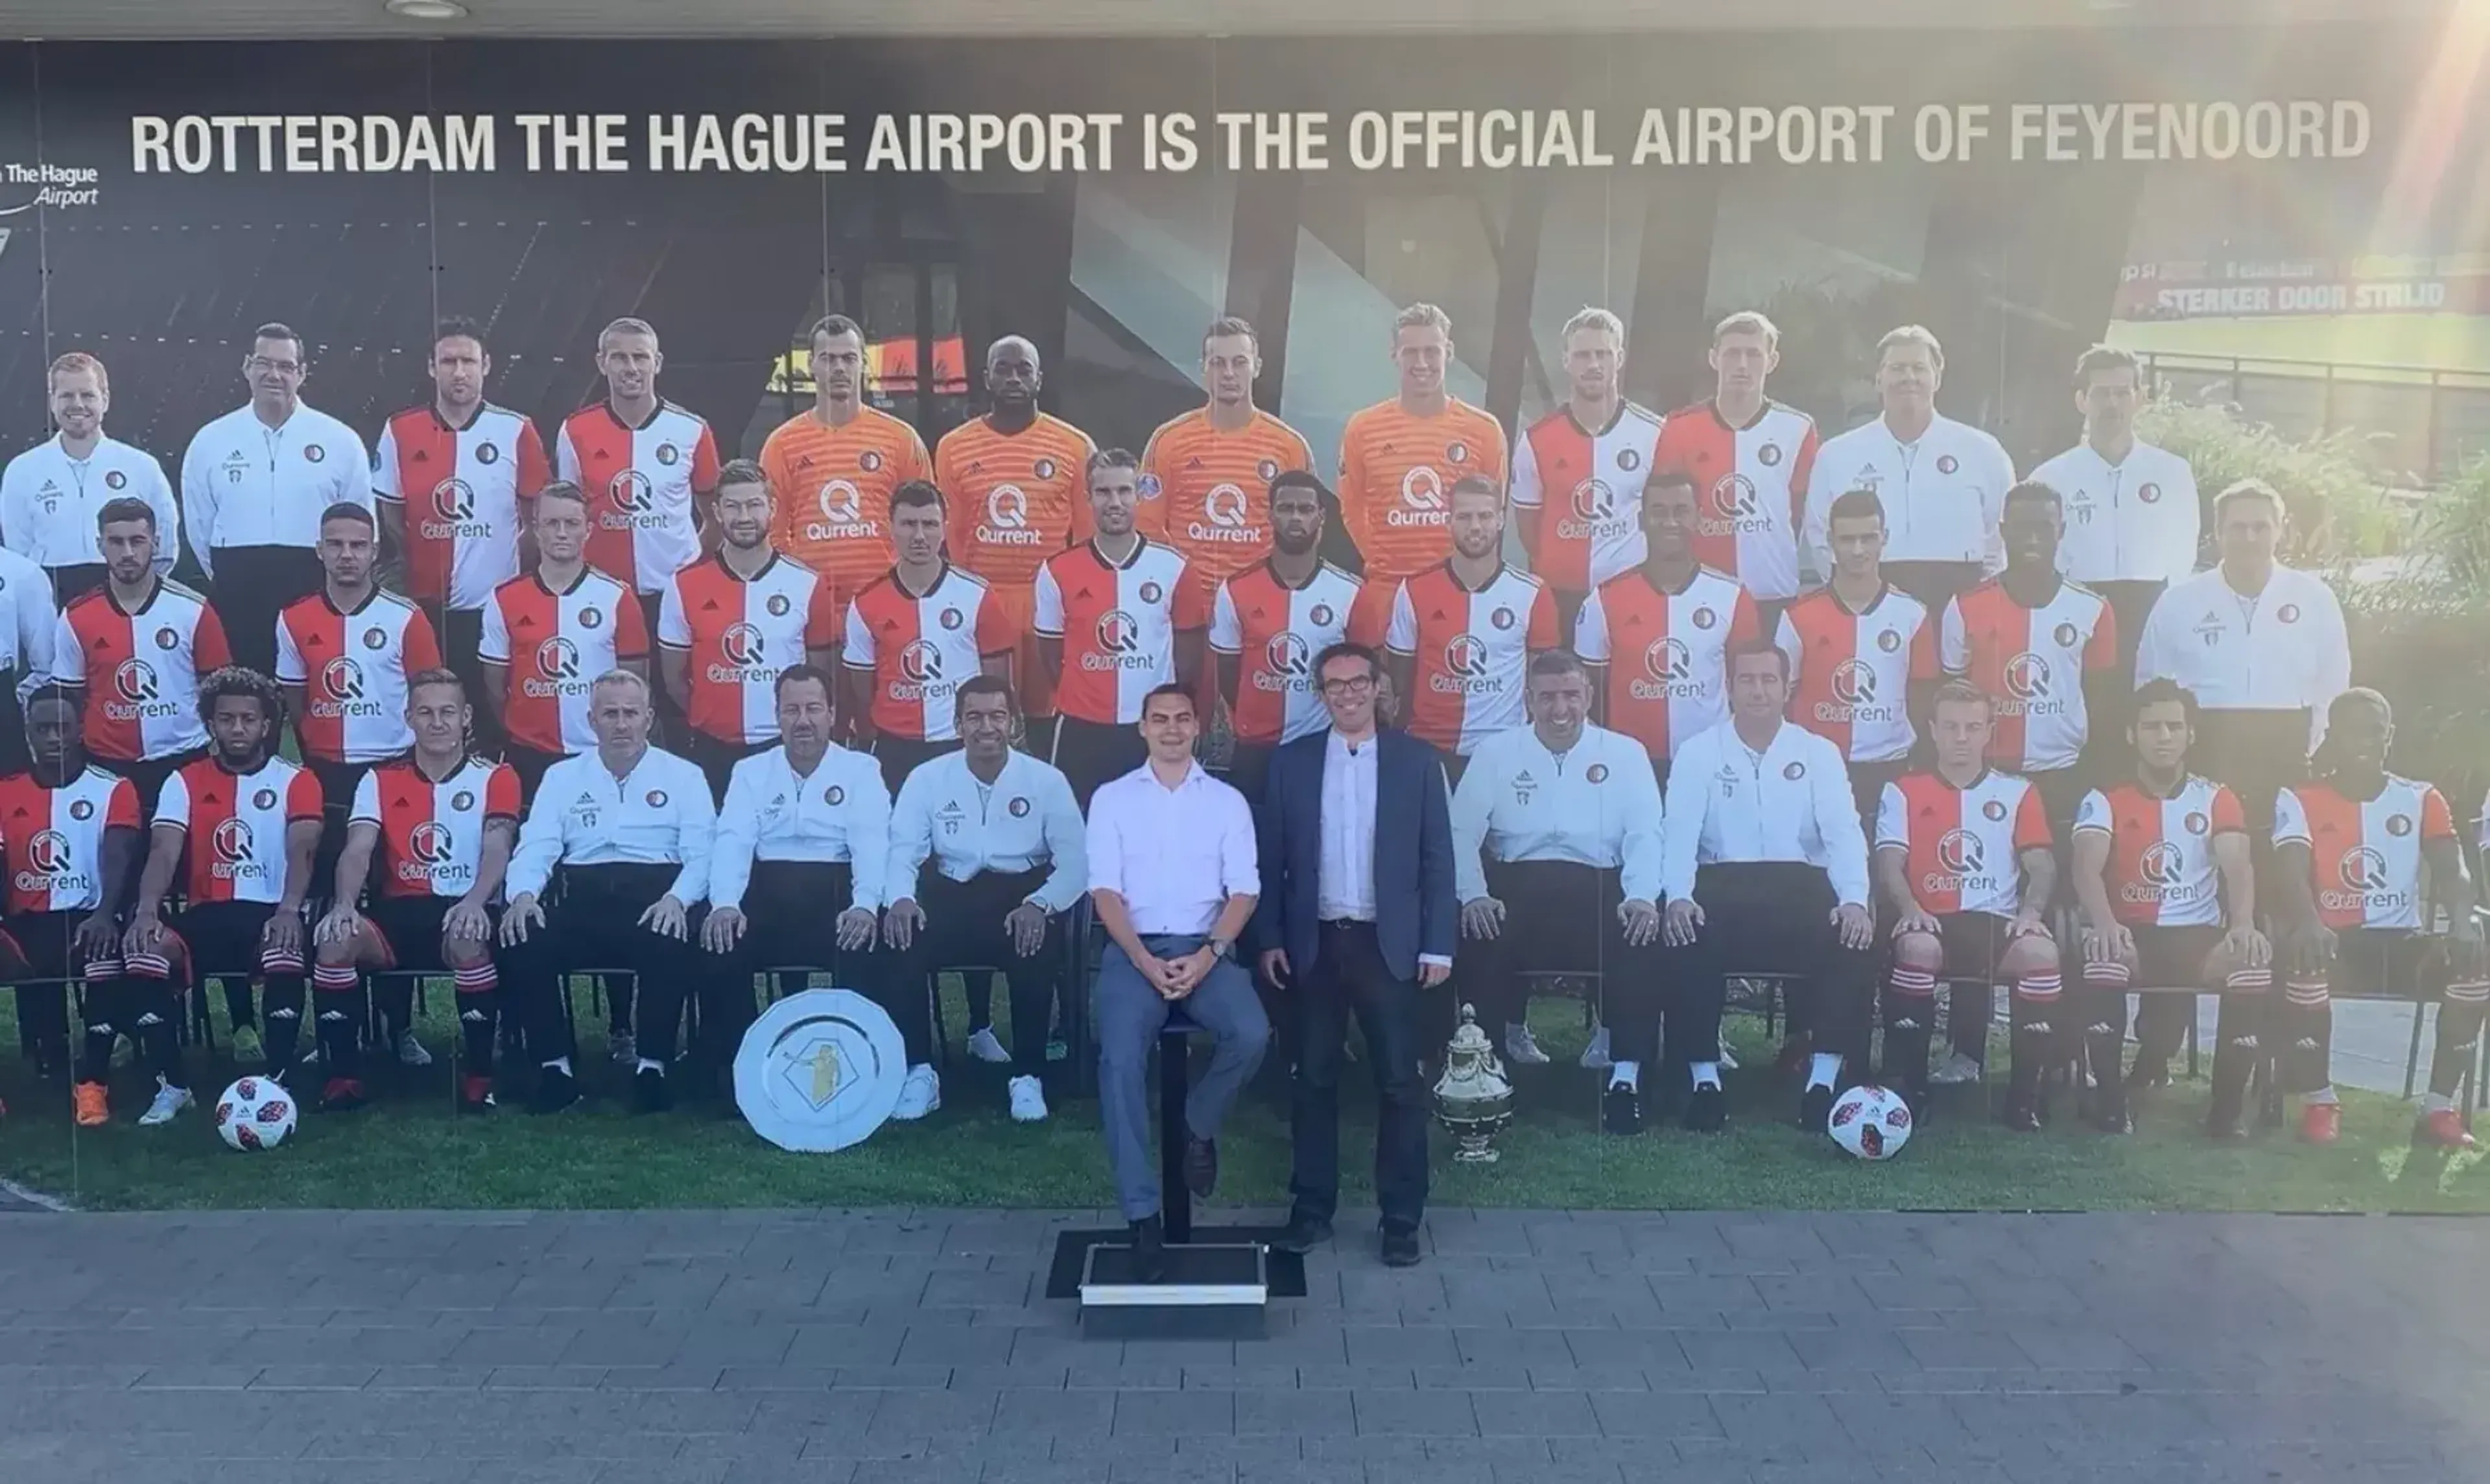 Andrew and James posing in front of a poste of Feyenoord football club in The Hague airport